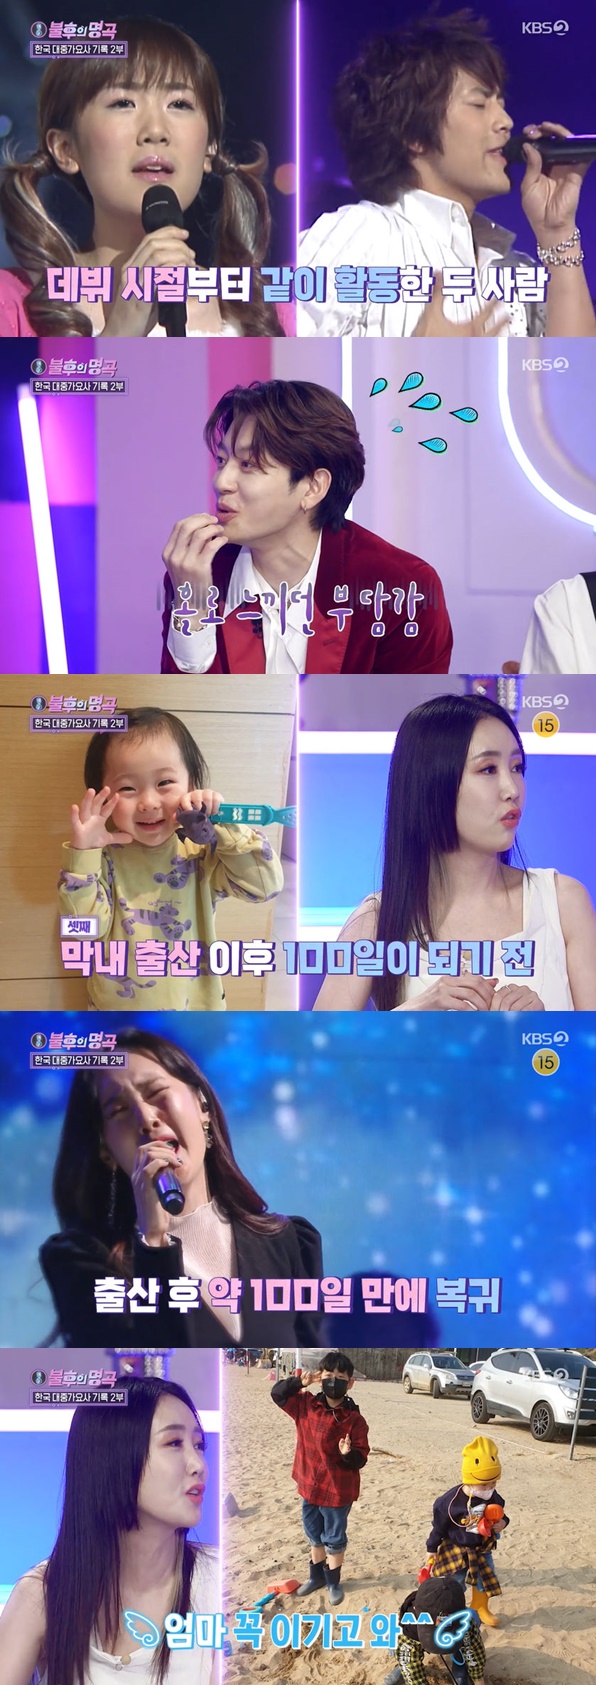 In the 553th KBS 2TV entertainment program Incorruptibilitys famous song broadcasted on the 30th, two special features of Korean pop songs were held.Young Tak won the first part of the show, followed by Sohyang & Min Woo Hyuk, Star, Seven & Park Sihwan, Jannabi Choi Jung Hoon and Mur.The star was pleased with his introduction as unique charm tone fairy and said, I like the modifier fairy.Then MC Kim Jun-hyun said, Three children to the youngest. The star said, I talk about fairy tales and say three children...I want to feel a little more fairy mood, he laughed.Star, who said it was his 20th anniversary, played Al Nghe with Seven, who was active at the same time; he was surprised, saying, It was The Slap with Seven in more than 20 years; its so much the same as it was.Seven also responded to the star, saying, Its so beautiful now.The star confirmed to the production team, Are you taking it? And caused a laugh.Seven said, The star asked me to tell you this, and I suddenly wanted to talk, so the horse (I do not come out well) and laughed.Seven said, Even though I gave birth to a child, my beauty still remains.Star, who appeared on the J. Y. Park side of The Great Song of Incorruptibility, recalled that time.It was 100 days after my youngest child, he confessed. I was less prepared to appear on the air.The star then laughed, asking, If you talk about this, do you go to the data screen? The data screen was released and the star showed off his beauty unlike his words.I could not come to Park, he said.Have you been supported by children? The star said, If the children say Im going to sing, they say Yi Gi and come unconditionally.He said, Yi Gi has to go, but there is Sohyang in the cue sheet.Sohyang and Min Woo Hyuk staged with Park Hyo-shins Wildflower; Cherry Blett members who heard the two songs shed tears.The star was horrified by the enormous amount of the two, but after the stage was over, he shook his head and laughed.I originally knew that Mr. Sohyang was good, but Mr. Min Woo Hyuk is good at you, he said.Sohyang and Min Woo Hyuk, who received checks from all the cast members, won the first victory by defeating Seven & Park Sihwan.Photo = KBS 2TV broadcast screen